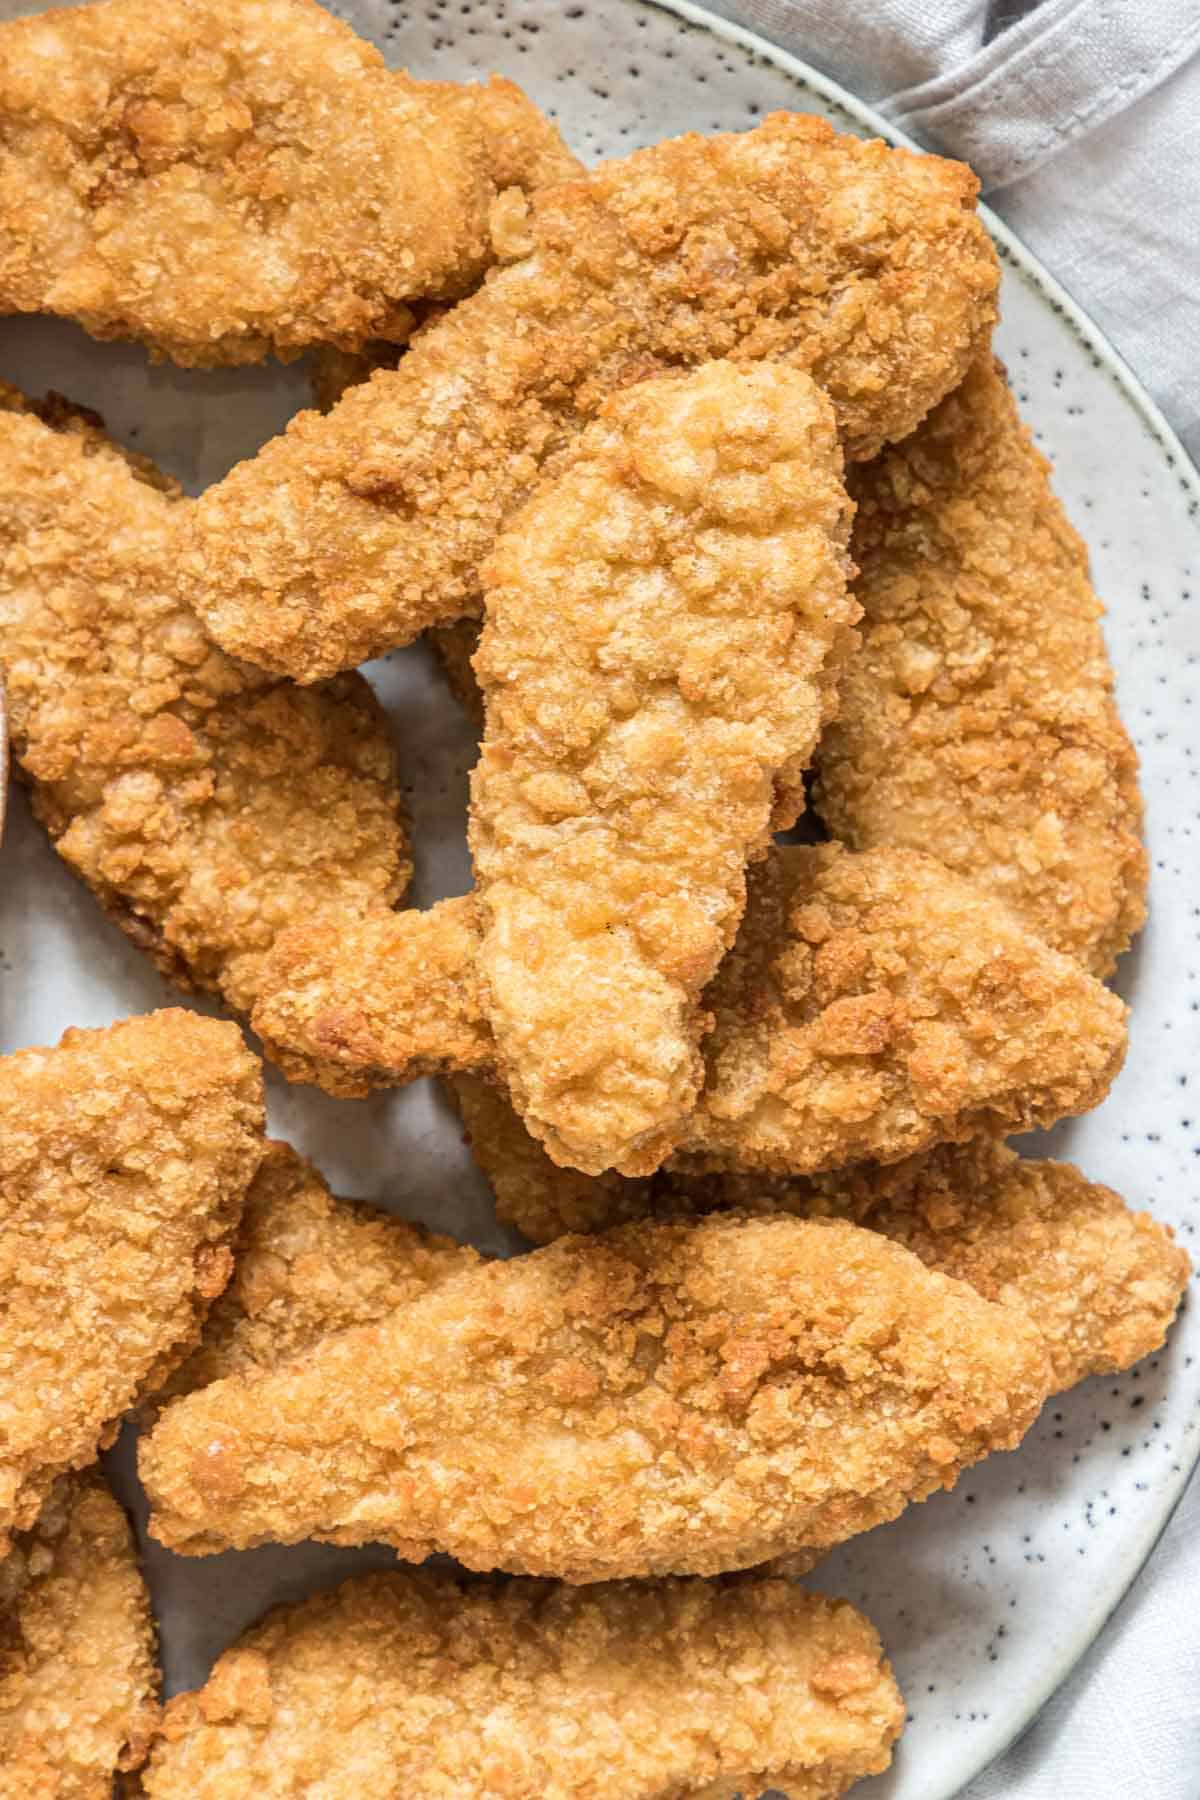 a portion of reheat breaded chicken tenders in air fryer served on a plate